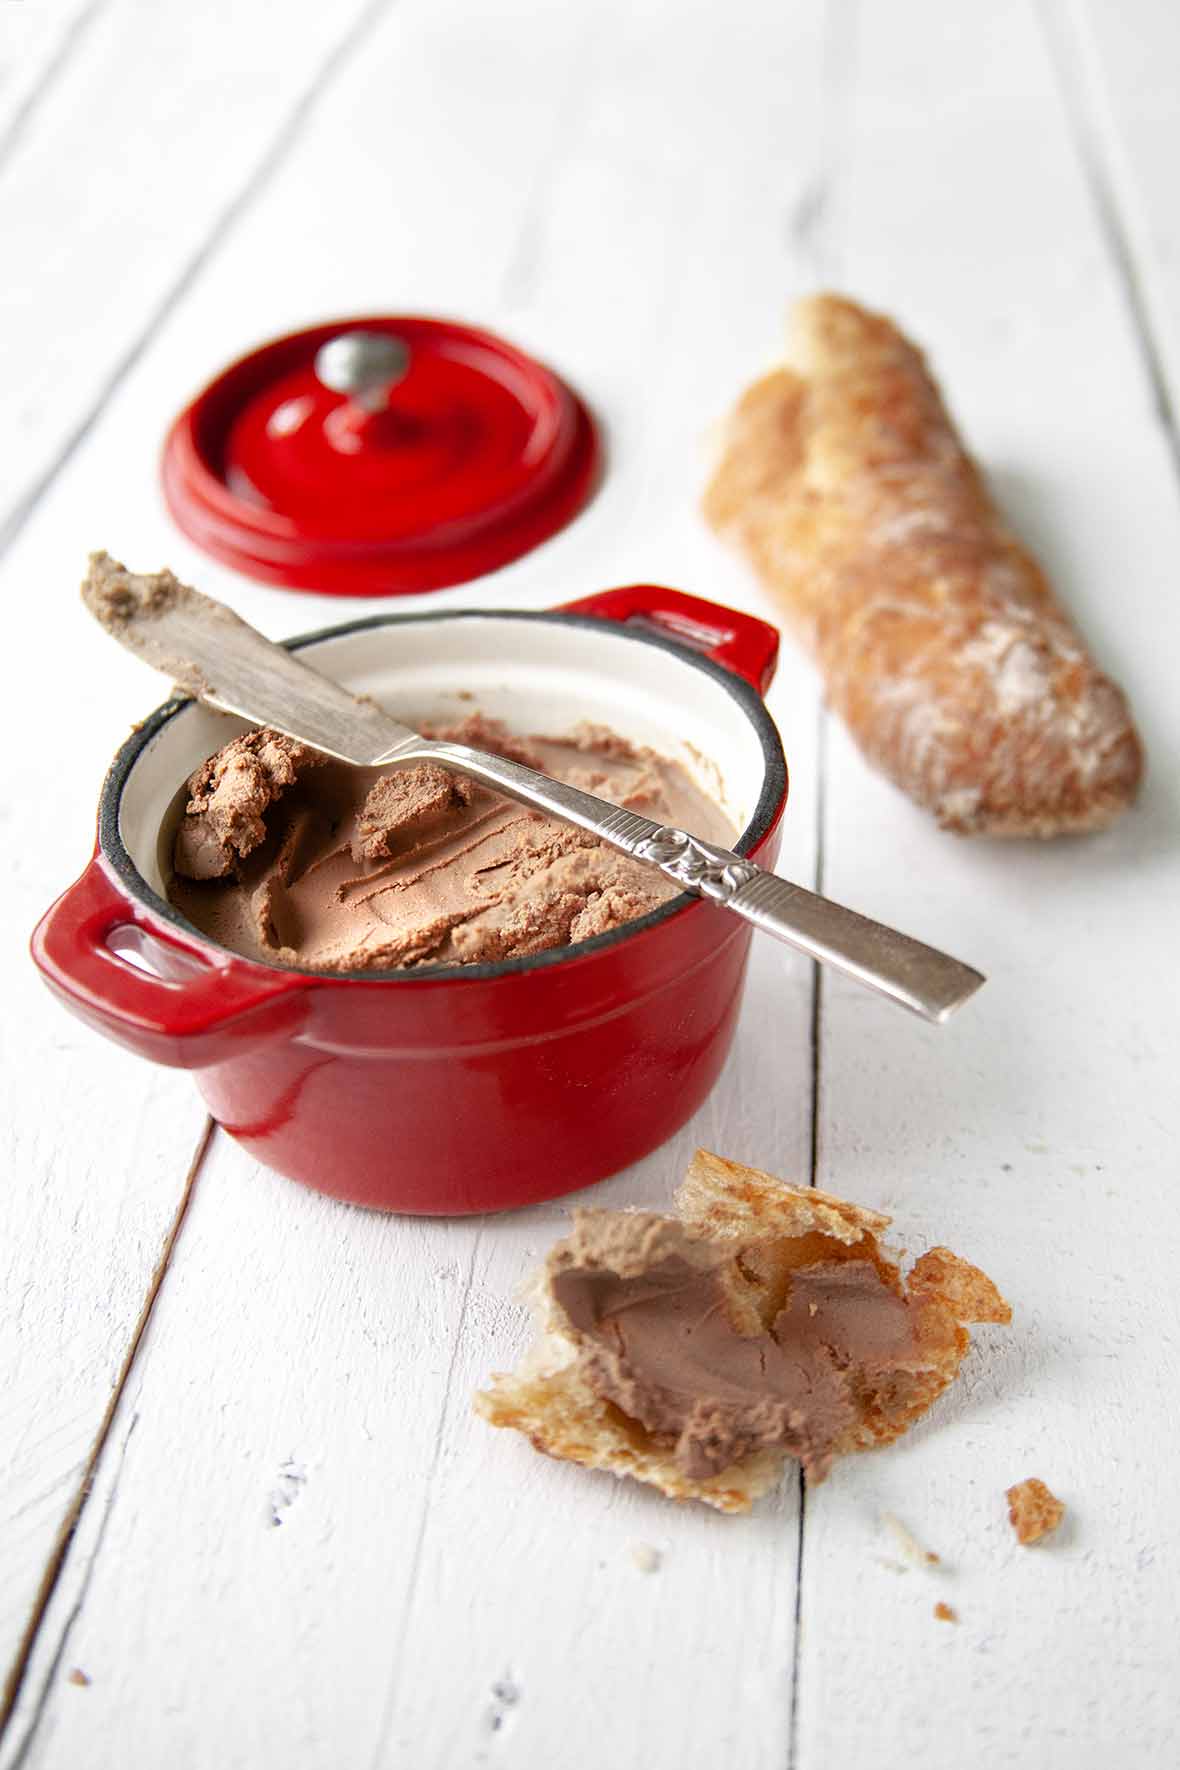 A small reck crock of easy chicken liver pate, nearby a baguette and and a hunk of bread smeared with pate